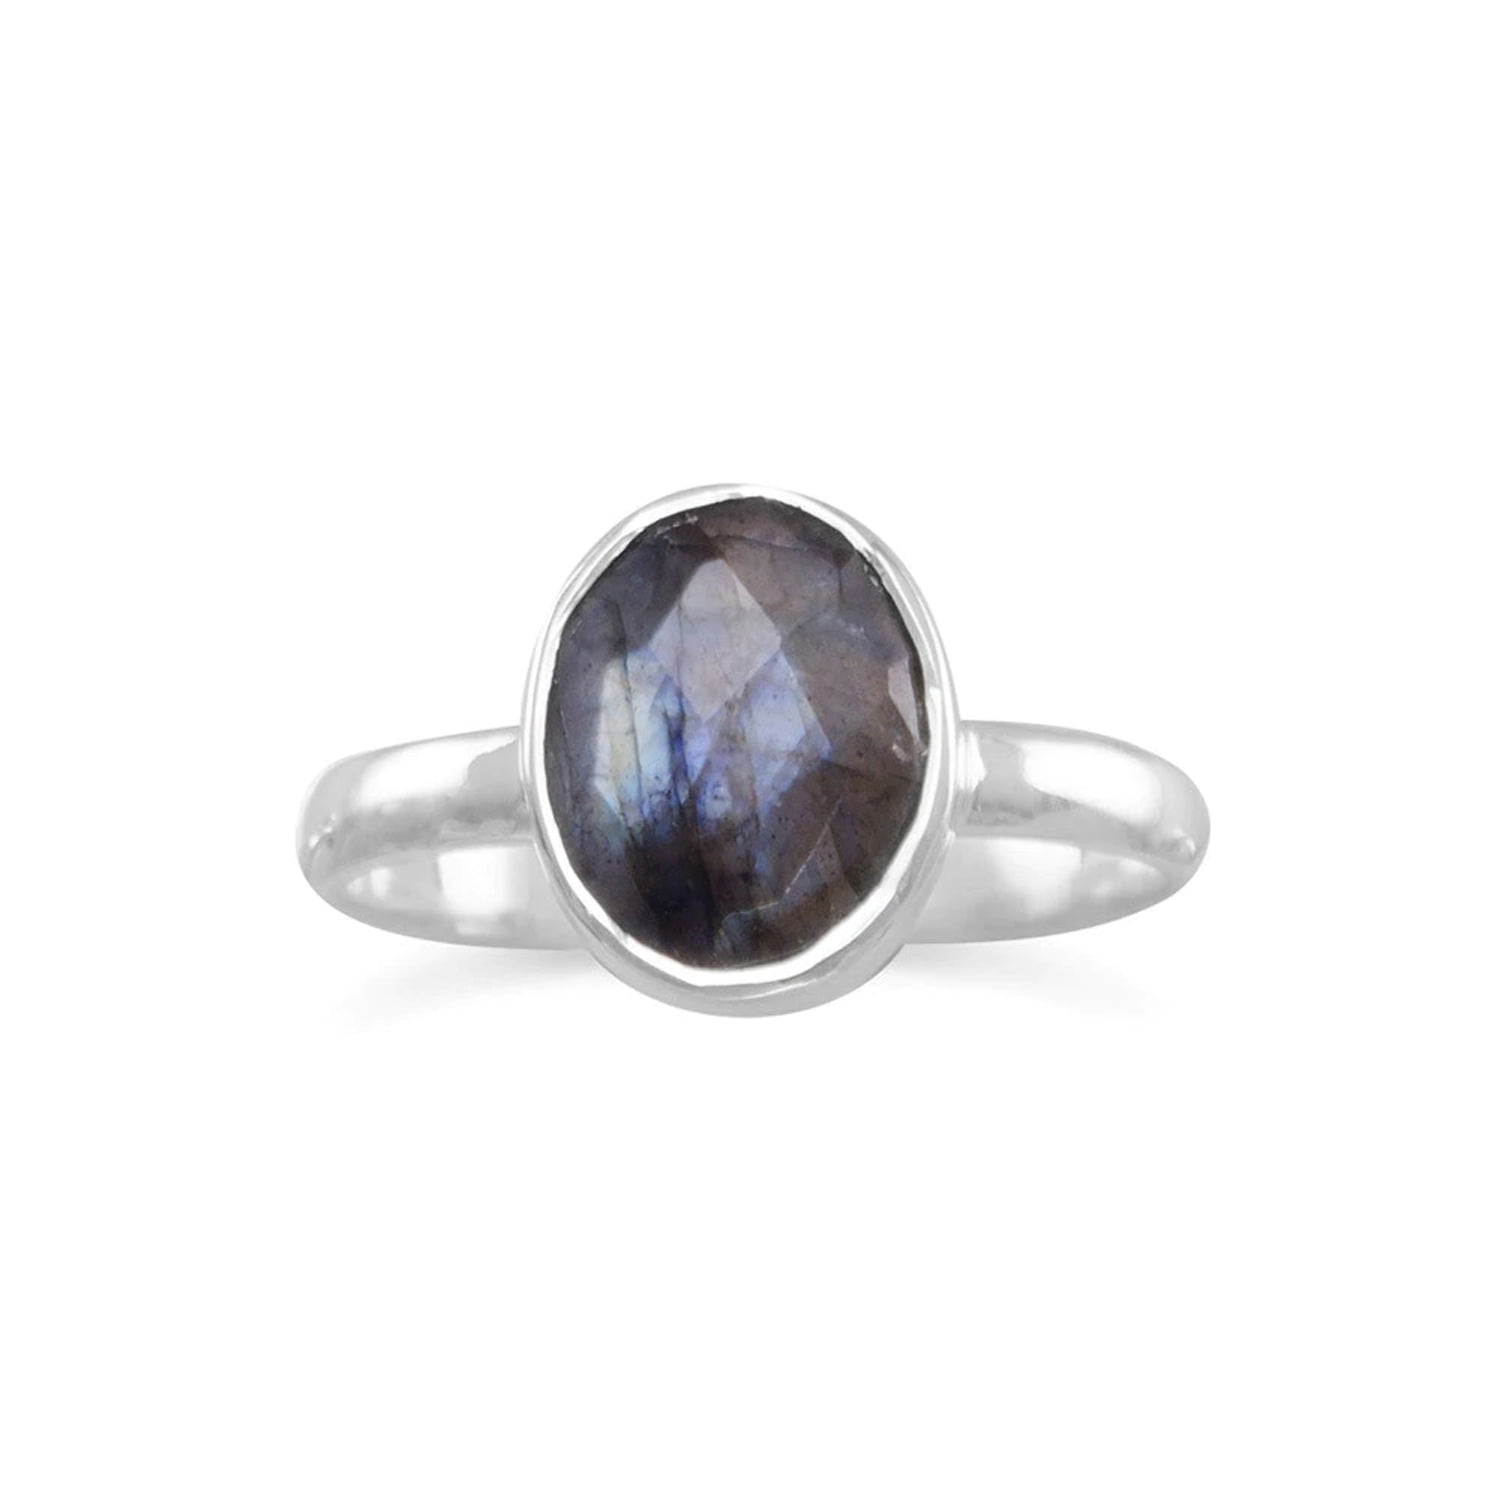 It has 4 small leaves and small balls around the stone with a detailed band. 12 x 25 mm size 5 ladies pear shaped blue Labradorite ring